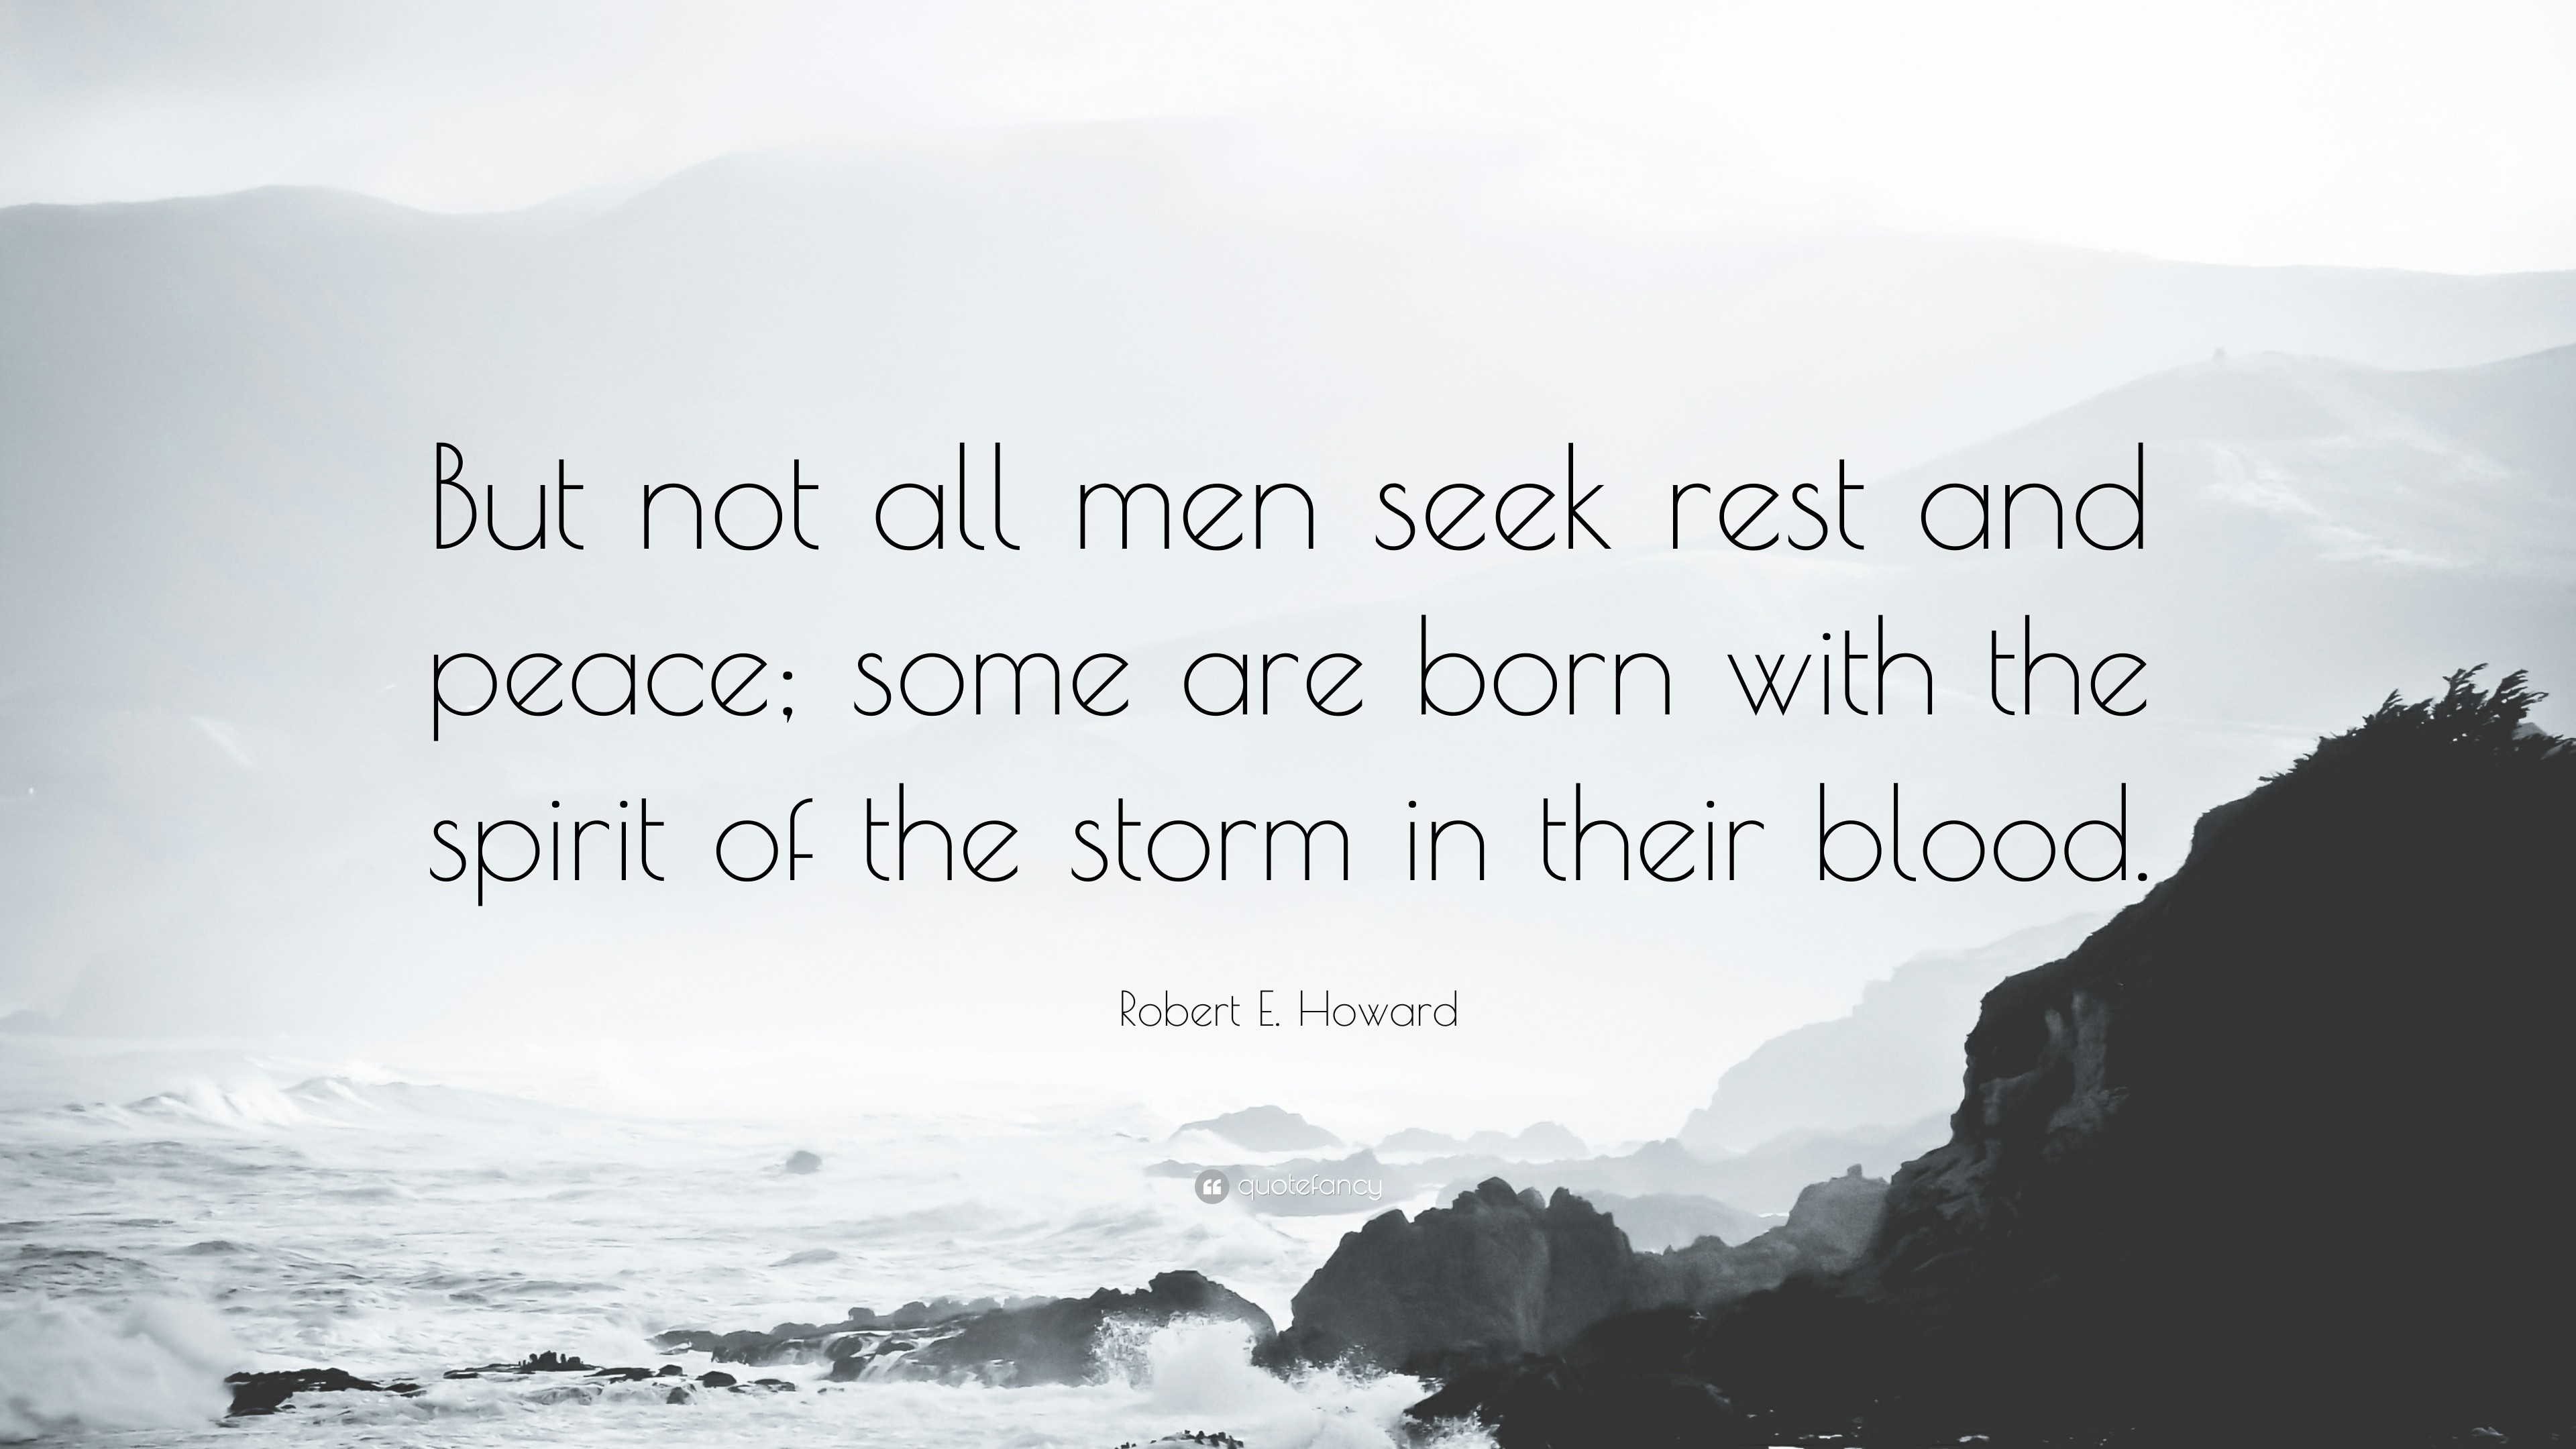 3840x2160 Robert E. Howard Quote: “But not all men seek rest and peace;